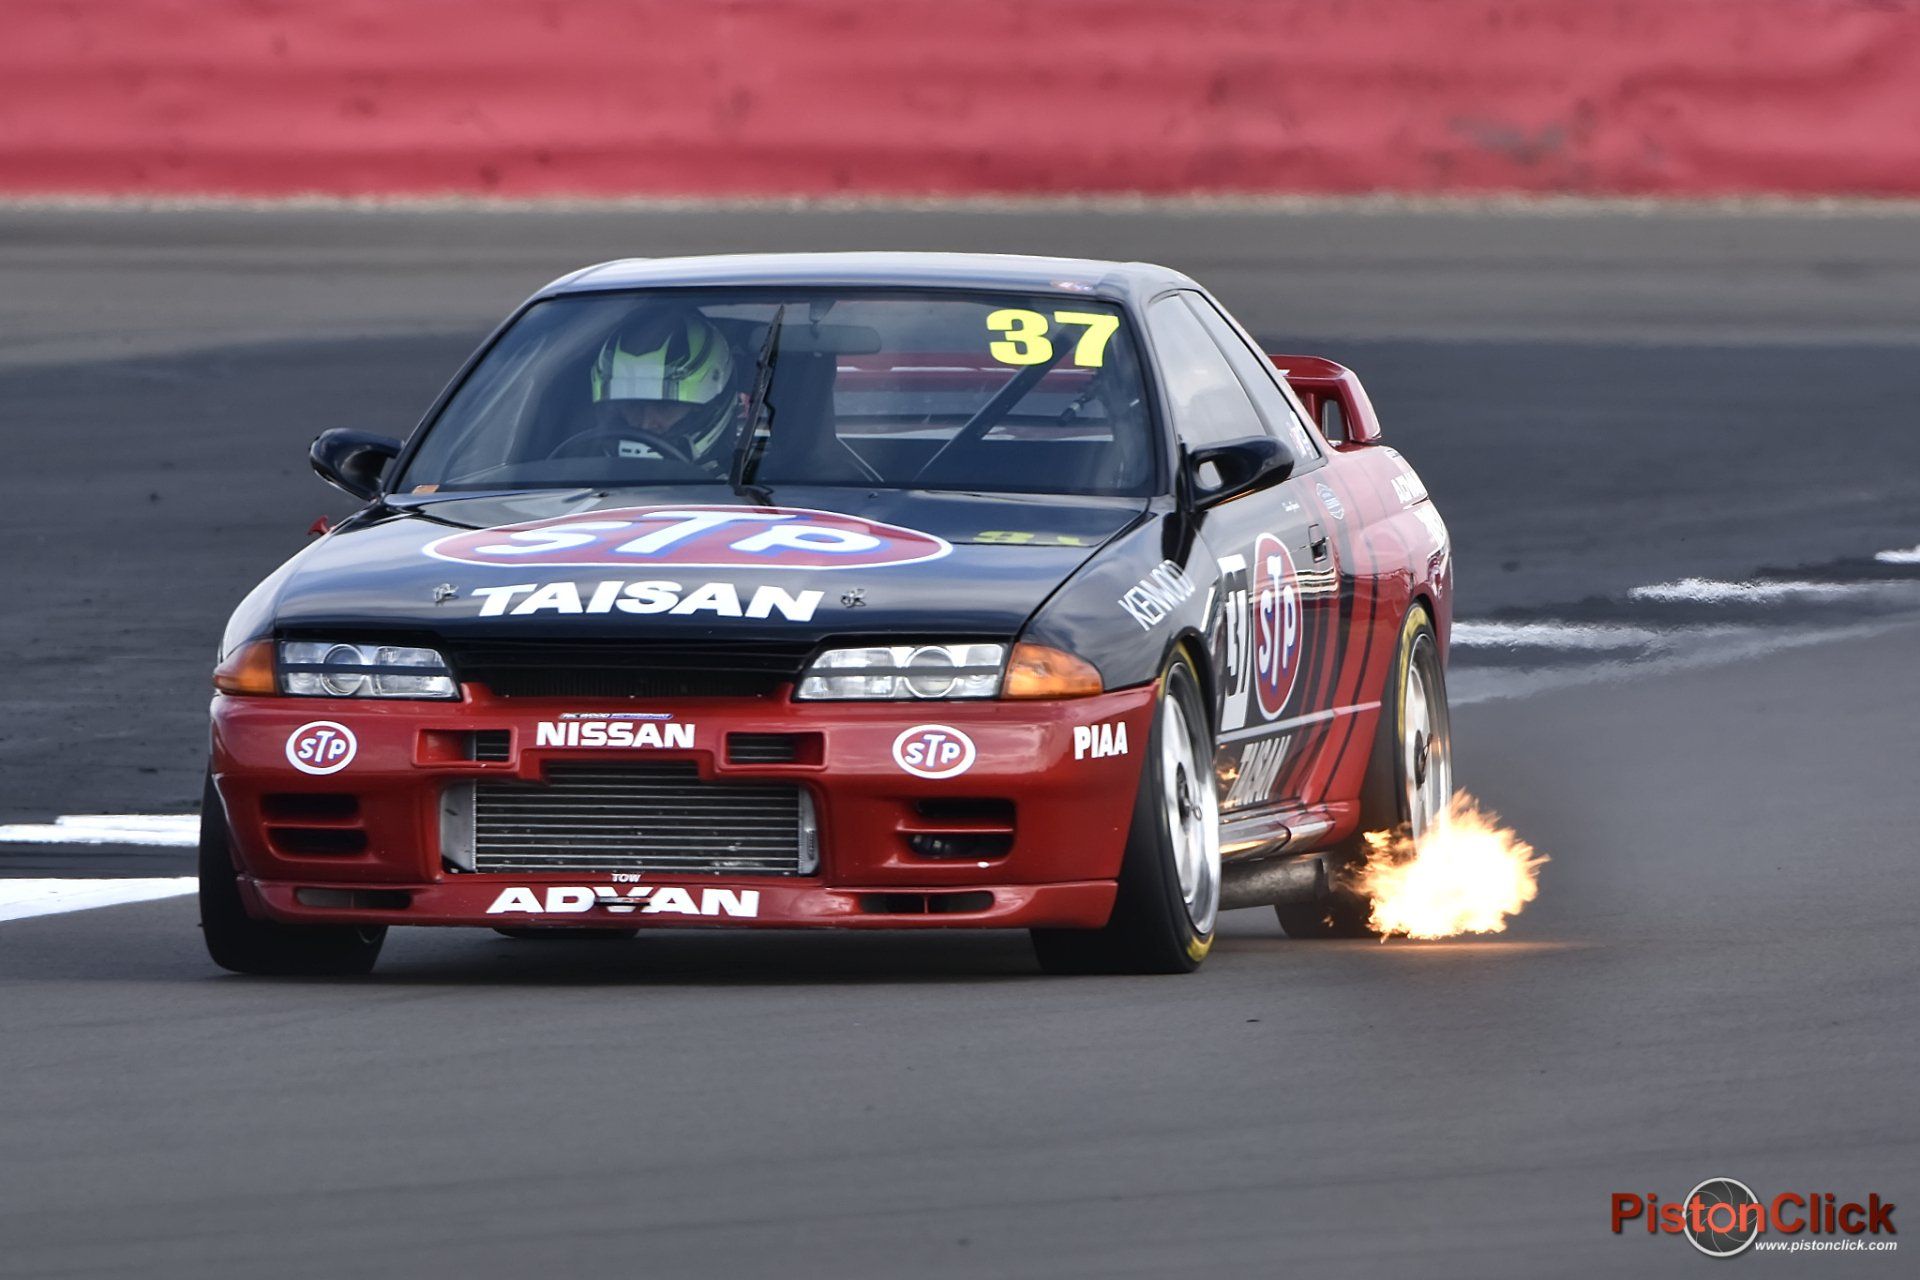 R32 GTR at the The Silverstone Classic